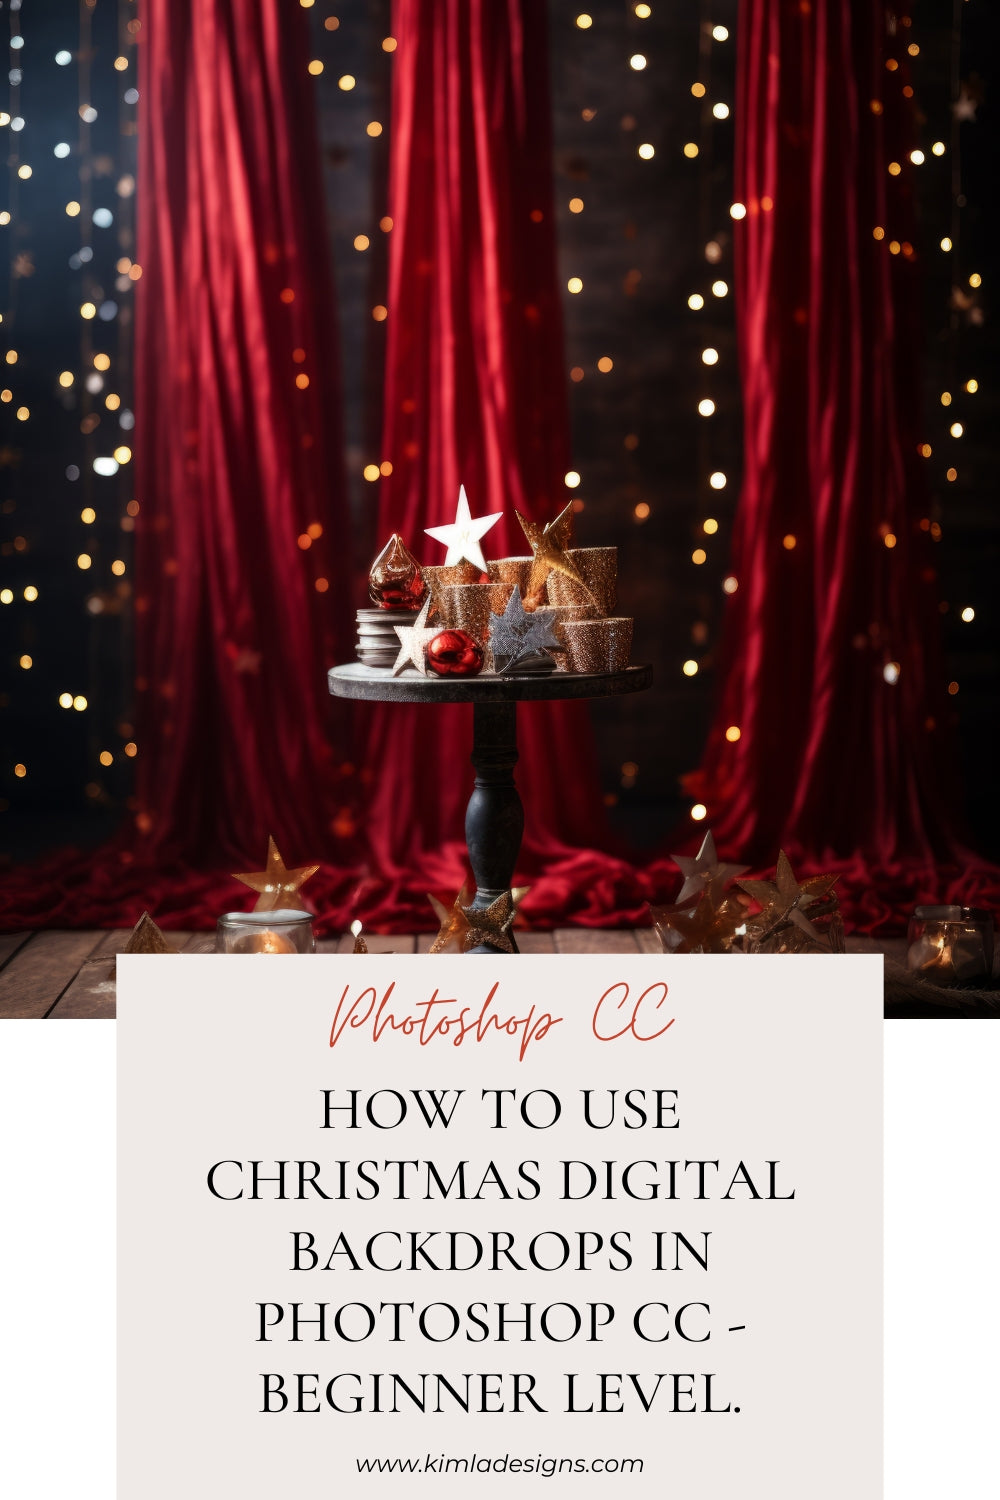 How to use Christmas Digital Backdrops in Photoshop CC - beginner level.